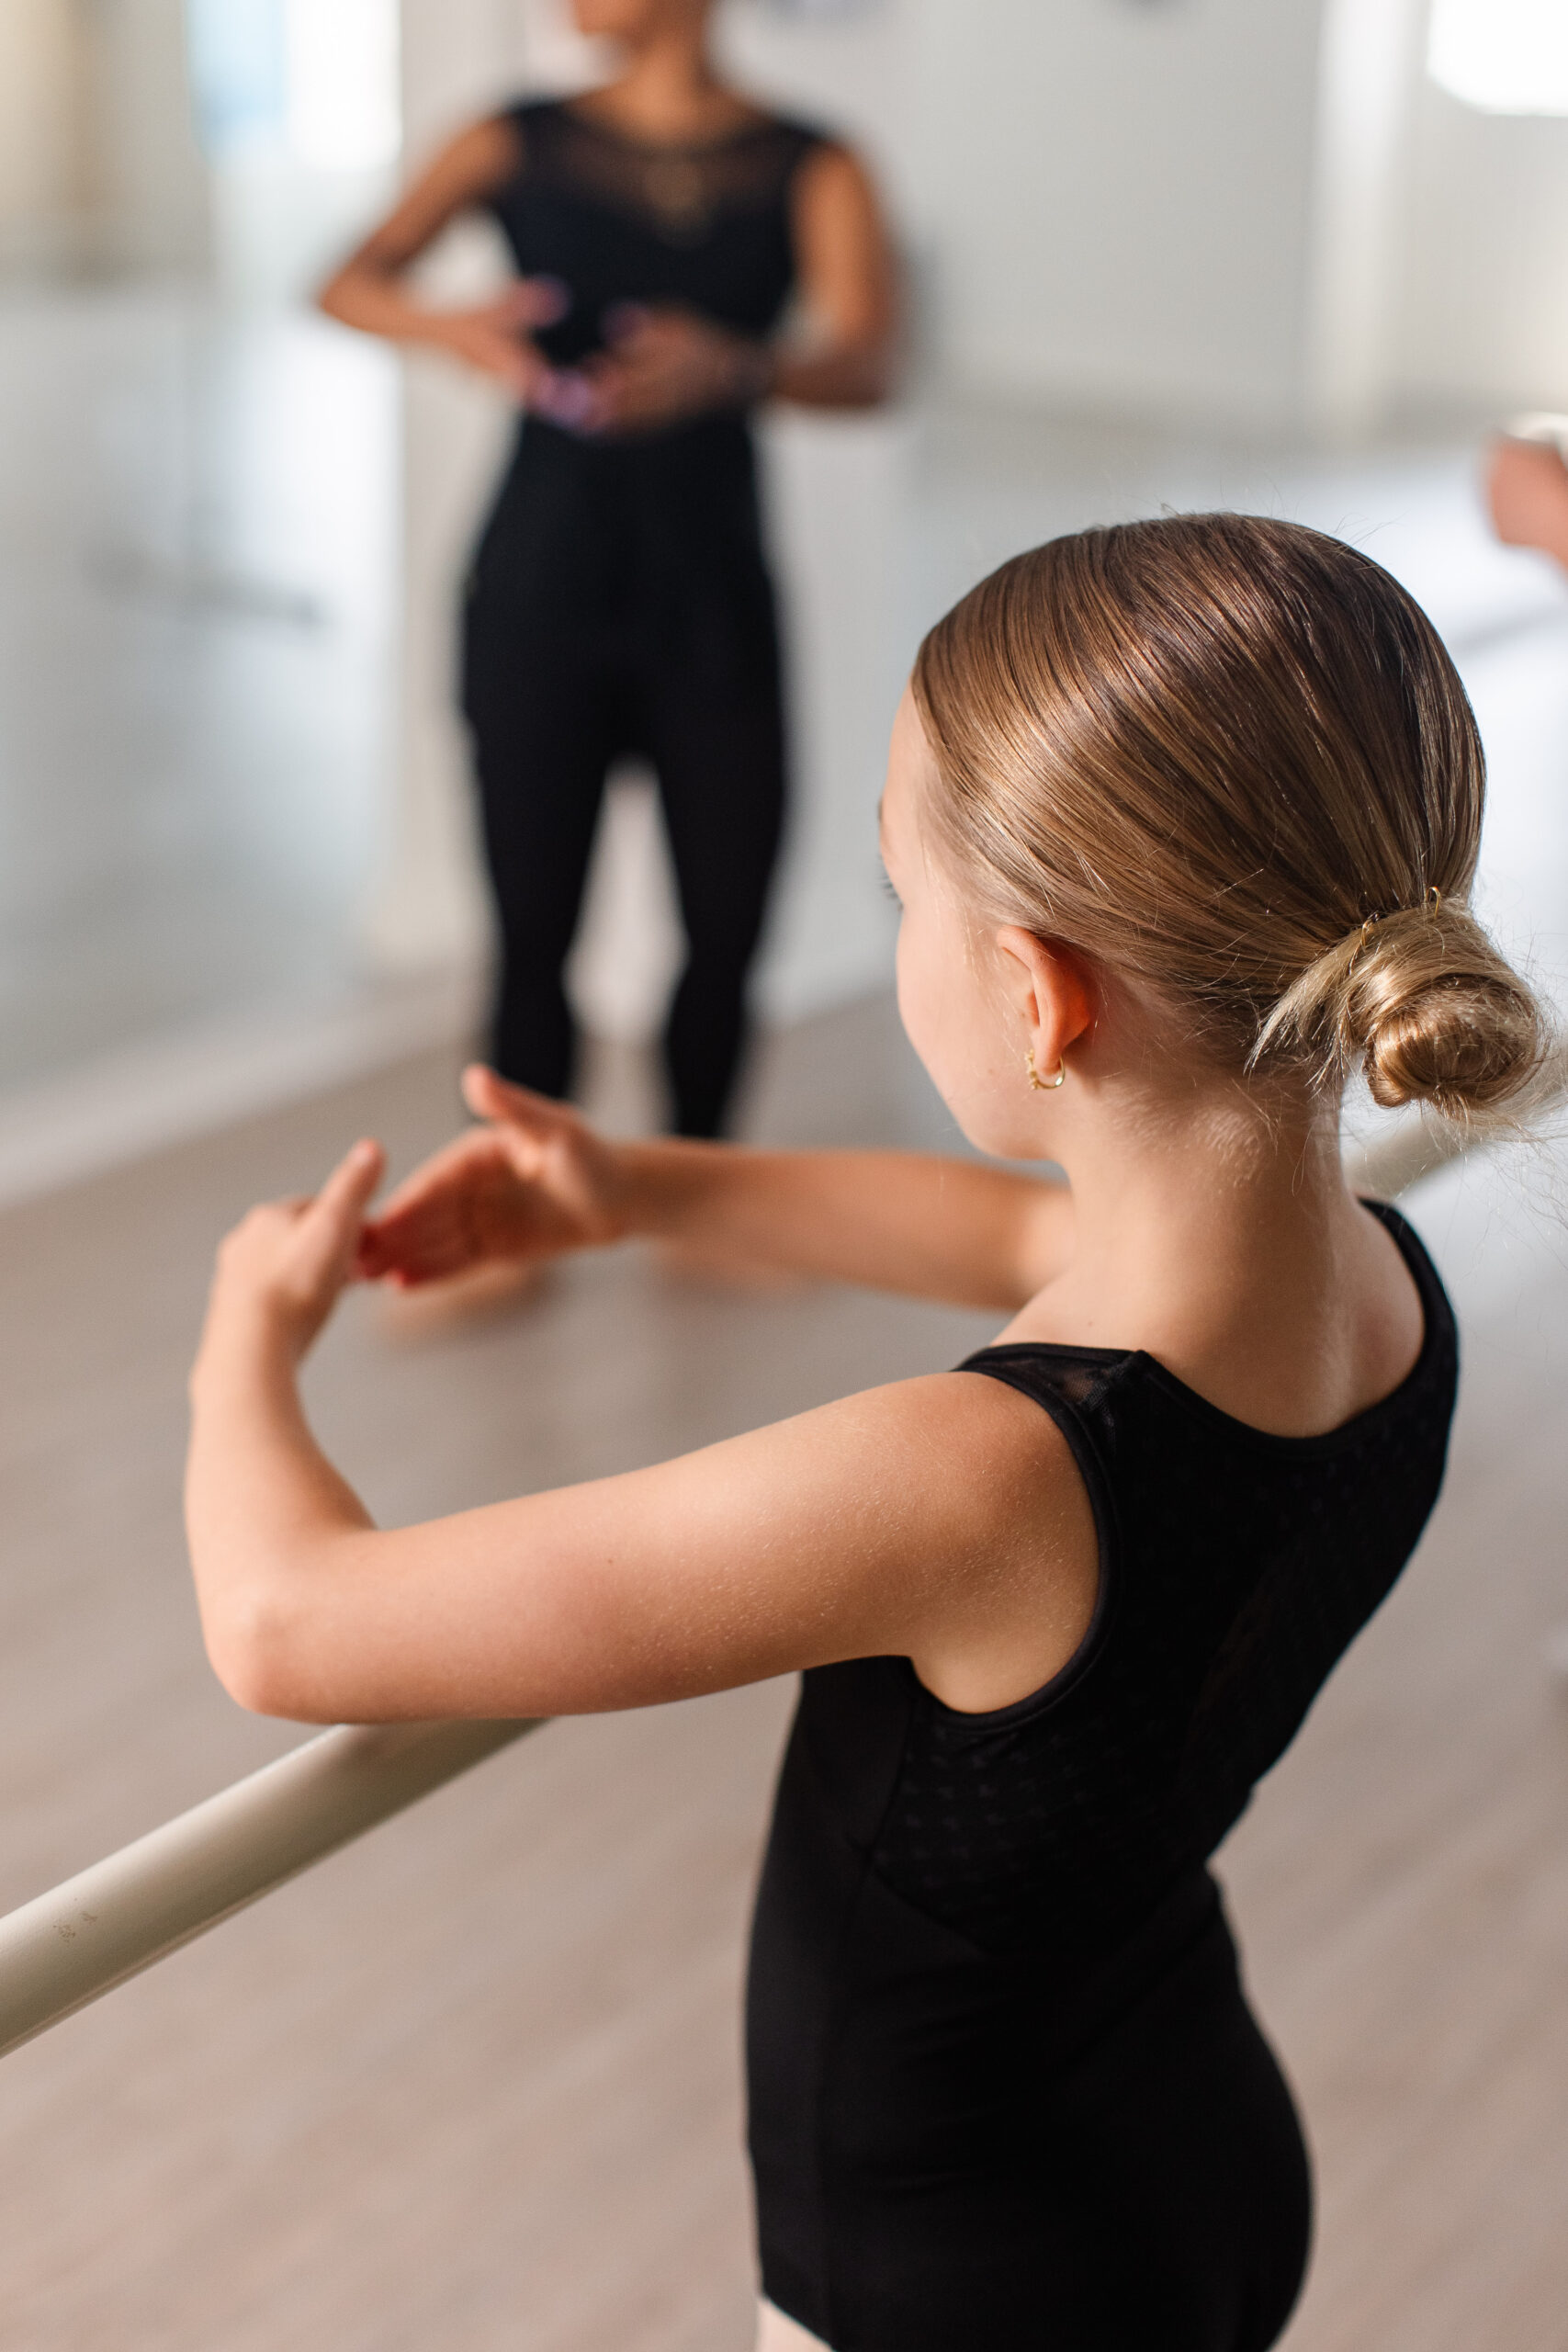 A young dancer places her arms in first position, modeled after her teacher